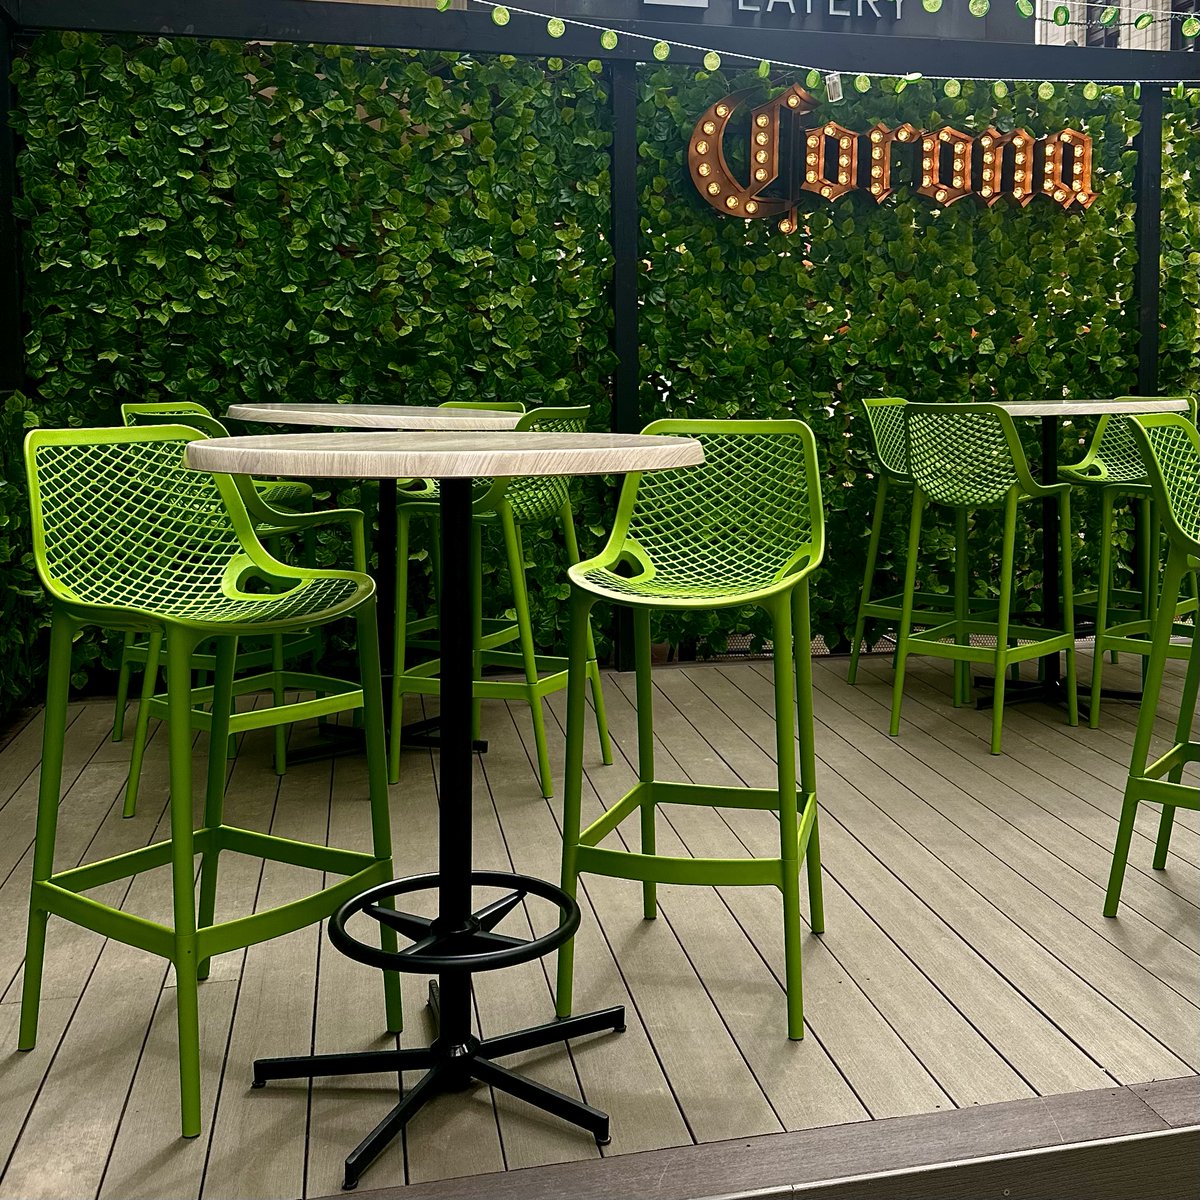 🌴#PatioSeason has arrived at The Office Restaurant & Bar🌴

After welcoming the brand-new restaurant to the CORE last month, The Office is excited to unveil their new (and pet-friendly) patio!☀️

Learn more at bit.ly/3X0BcvN

#findyourselfdowntown